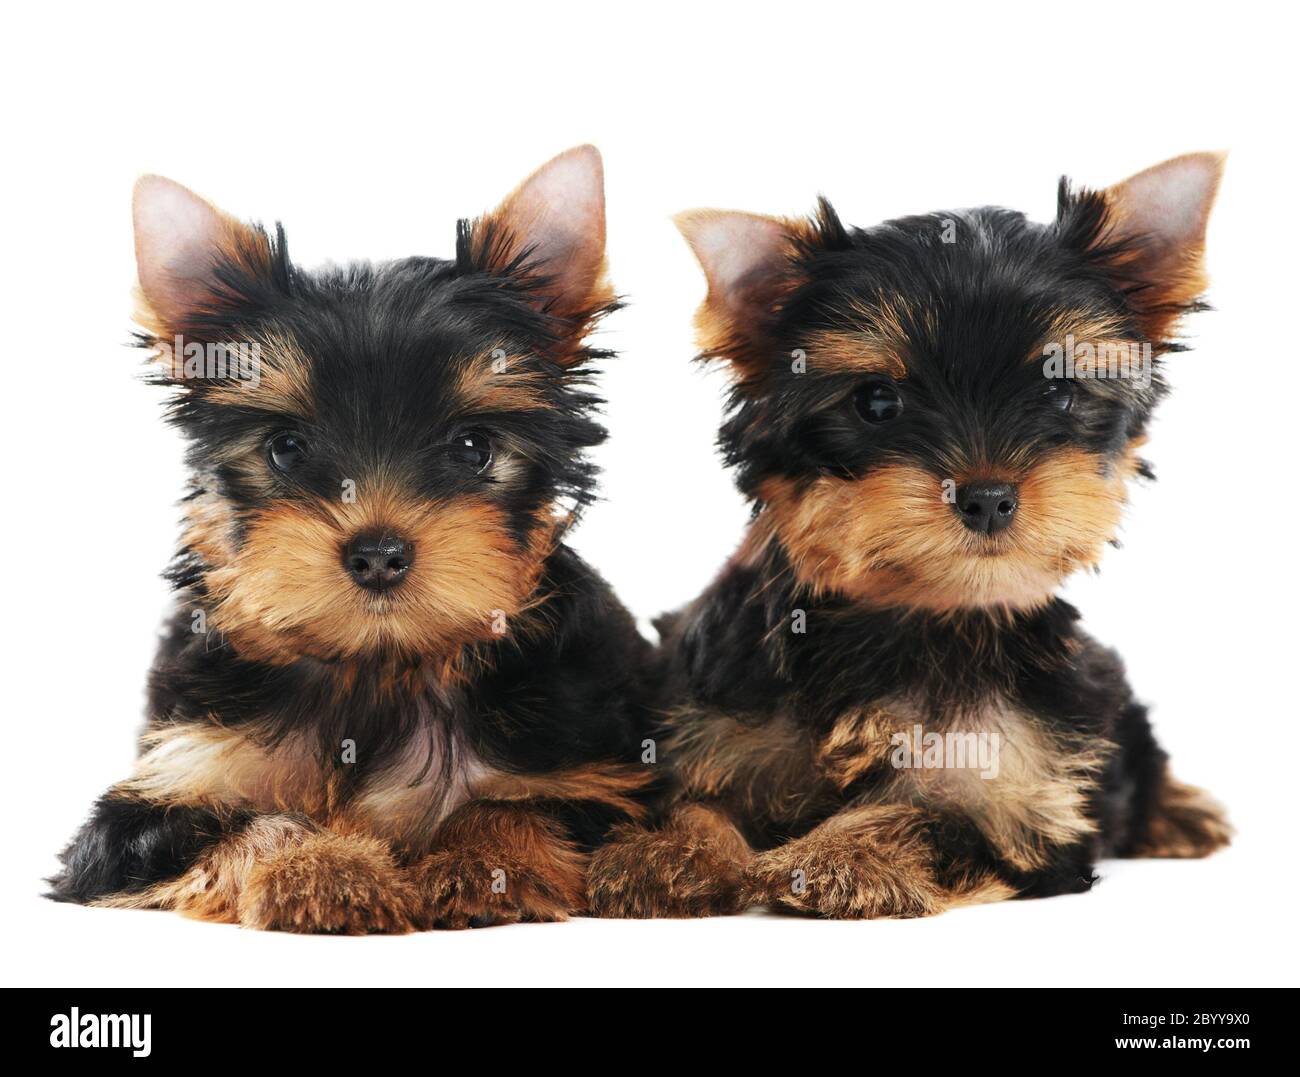 YORKSHIRE TERRIER GLOSSY POSTER PICTURE PHOTO yorkie dog puppy puppies cute 218